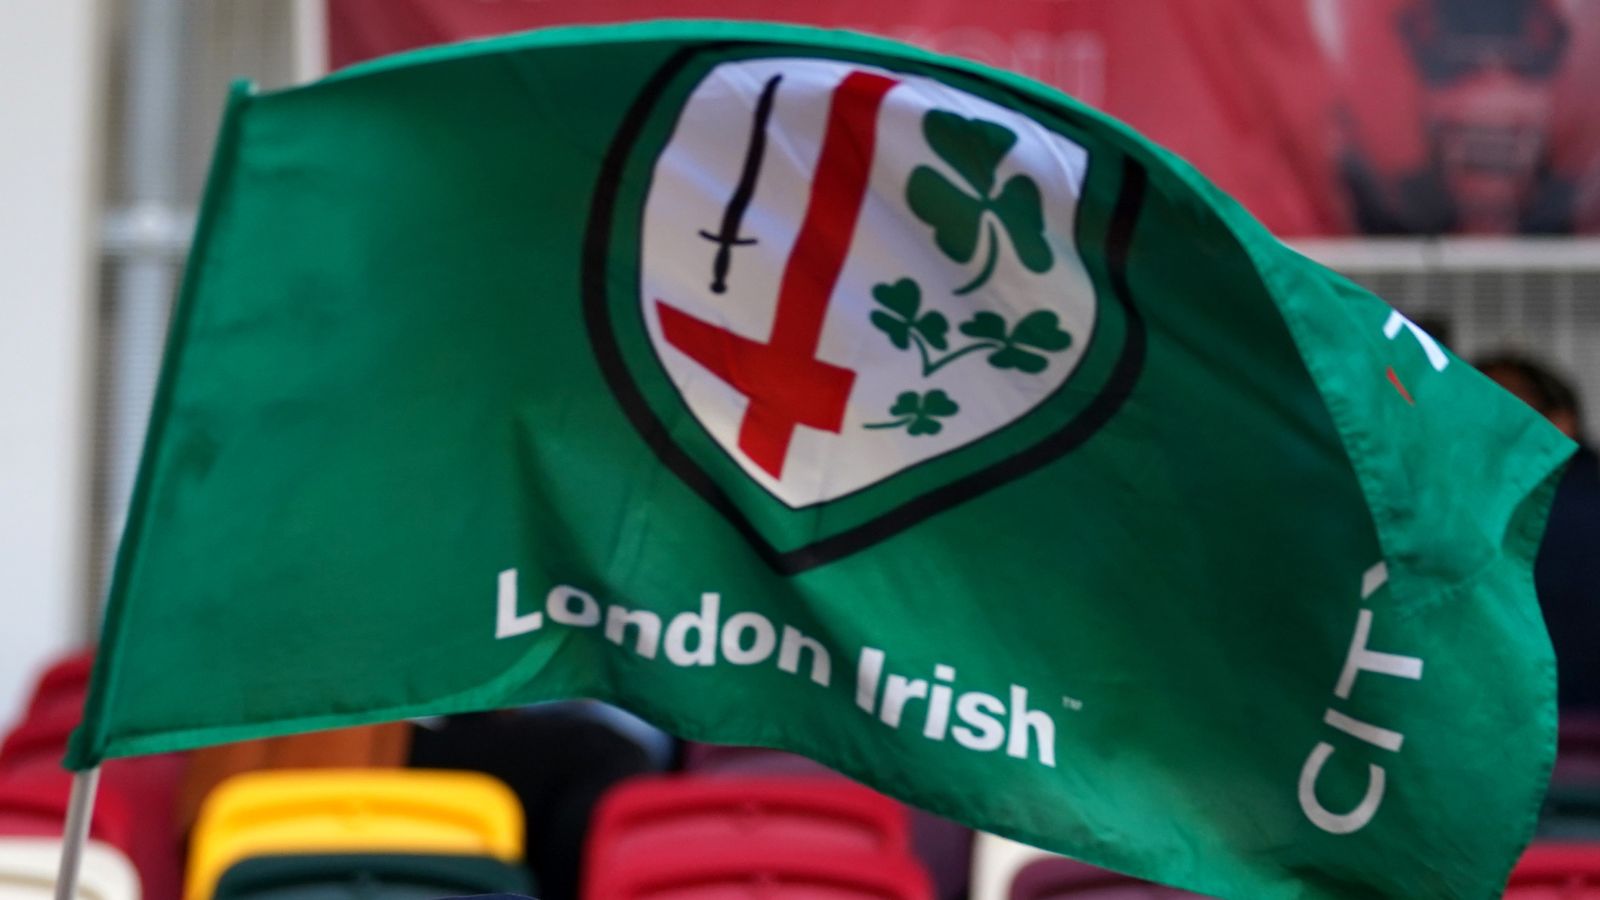 London Irish face suspension from Premiership as RFU deadline nears over proposed takeover | Rugby Union News